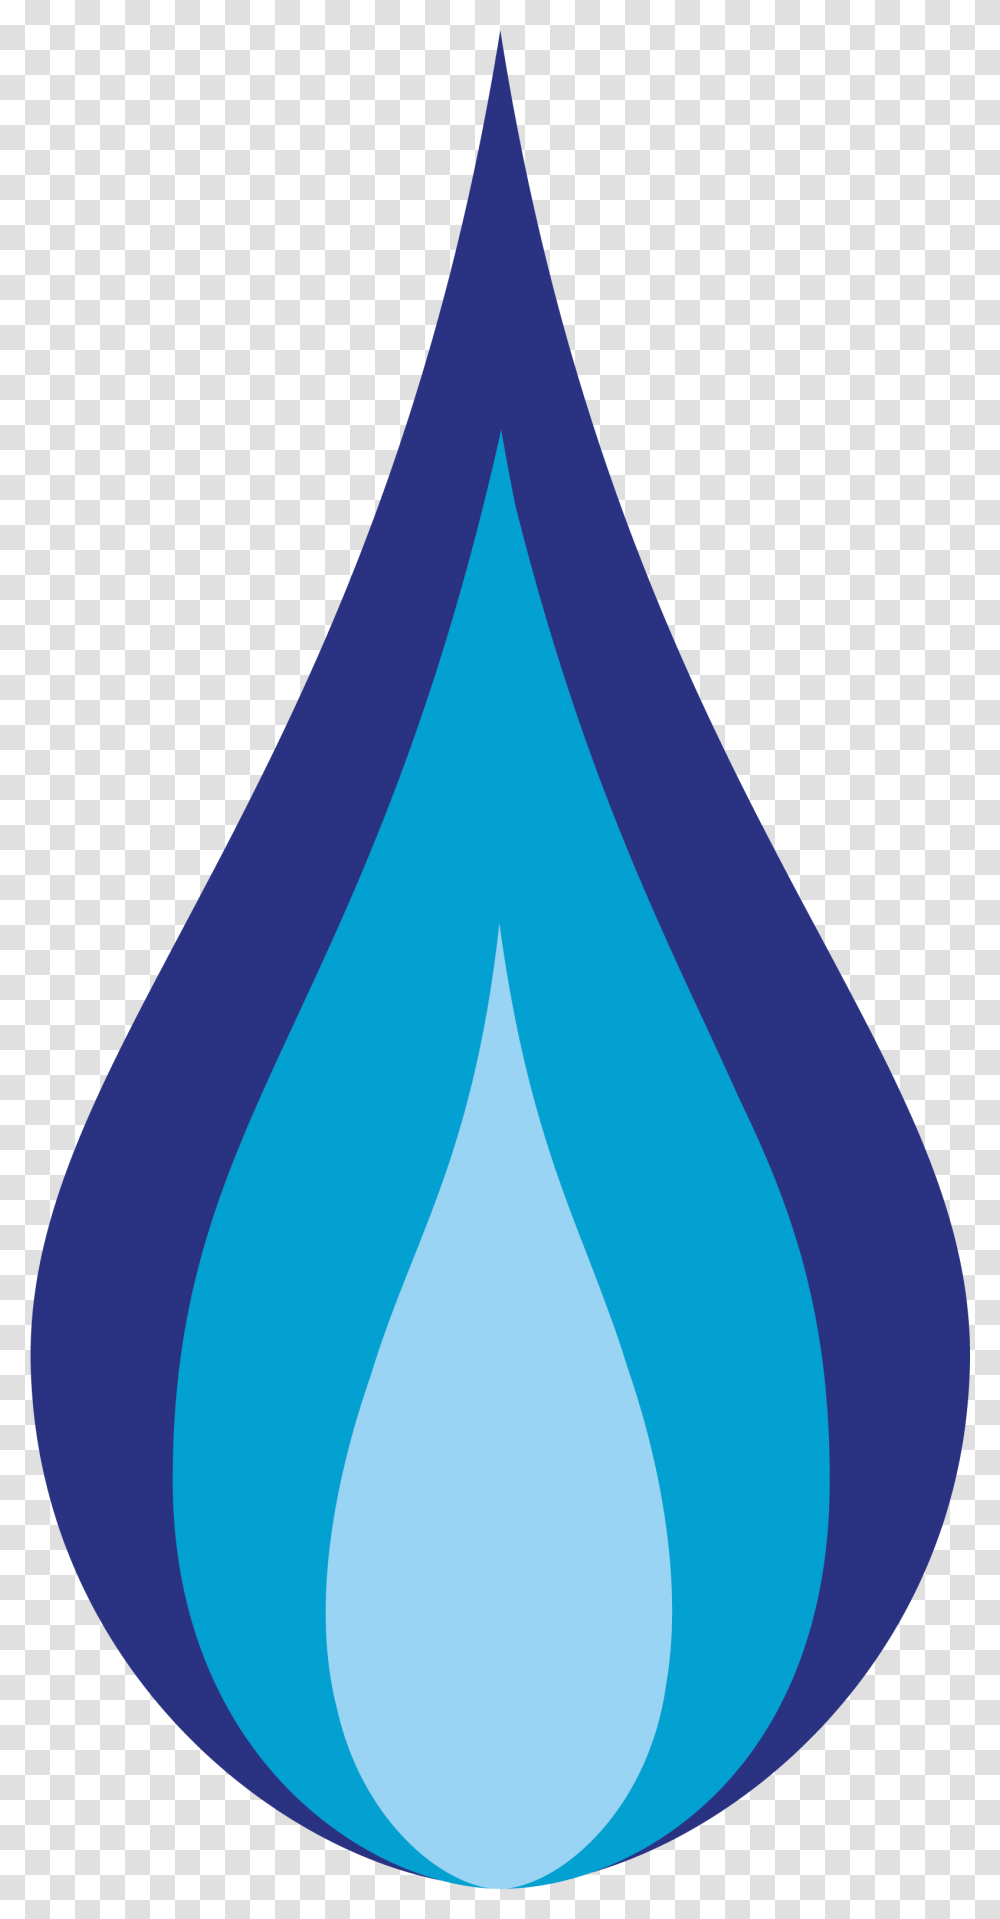 Amenti Blue Flame Rediscovery Press Bunsen Burner Blue Flame No Background, Droplet Transparent Png